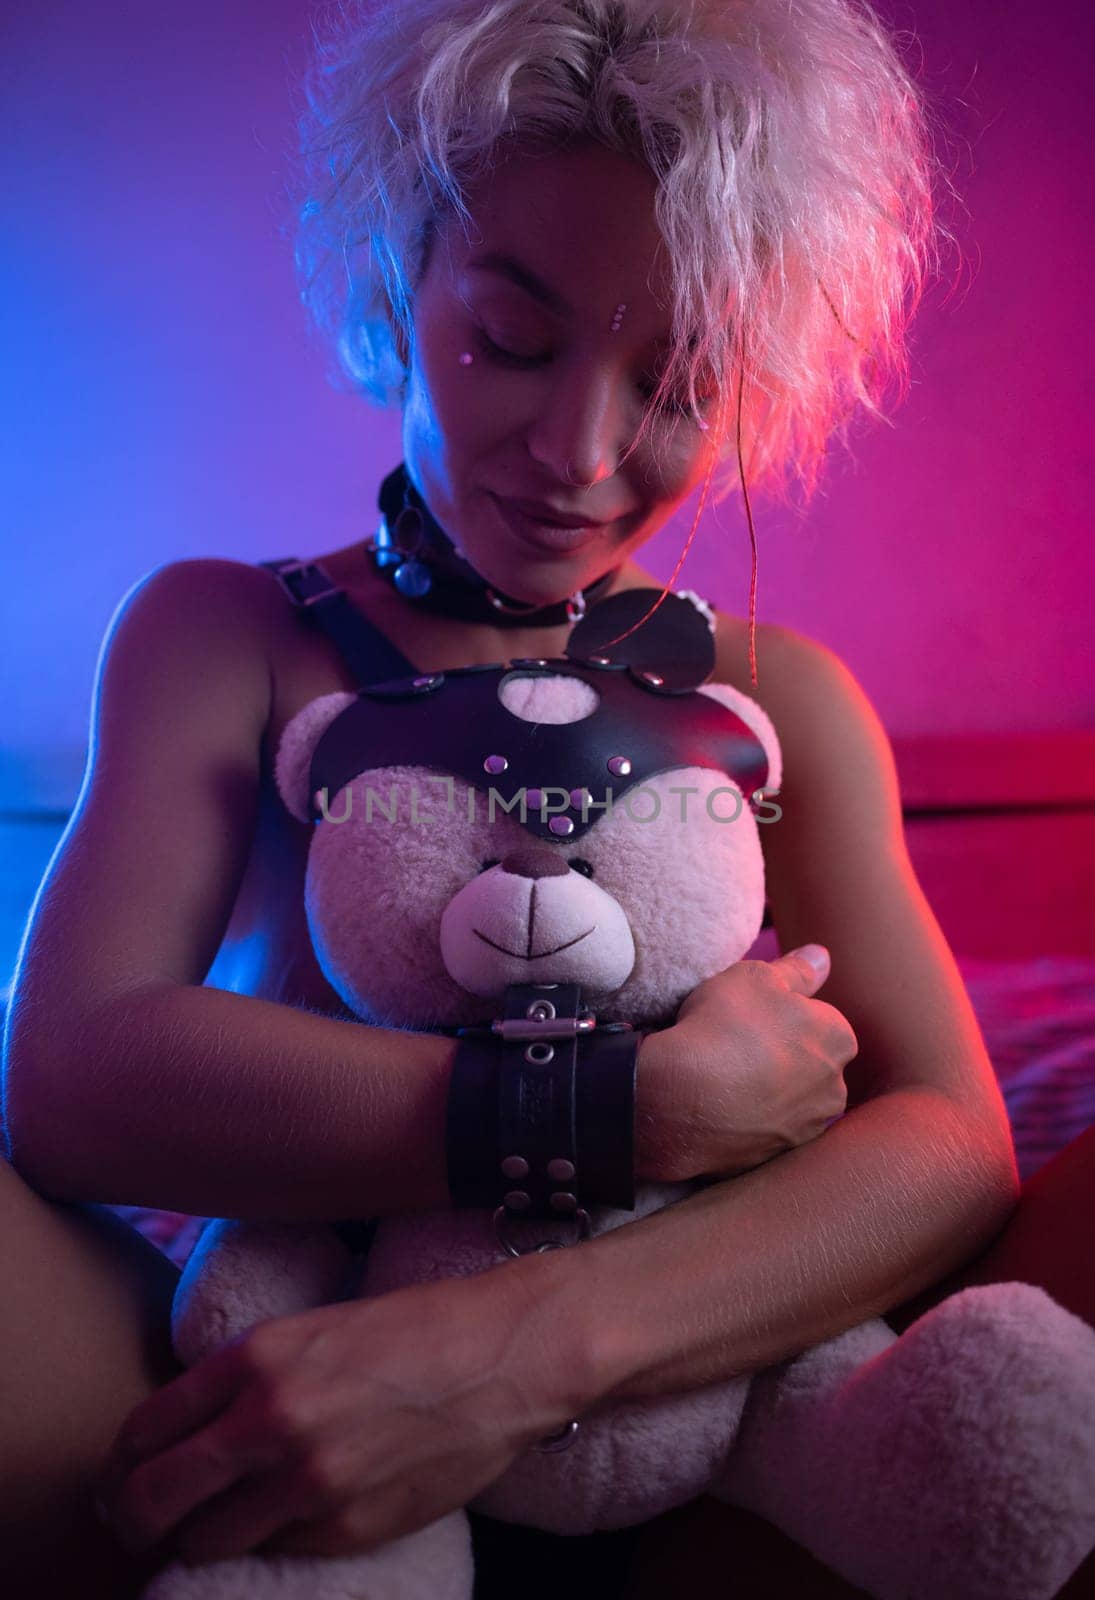 sexy girl in leather in a bdsm accessory on the bed with a cute teddy bear with emotions and in neon light